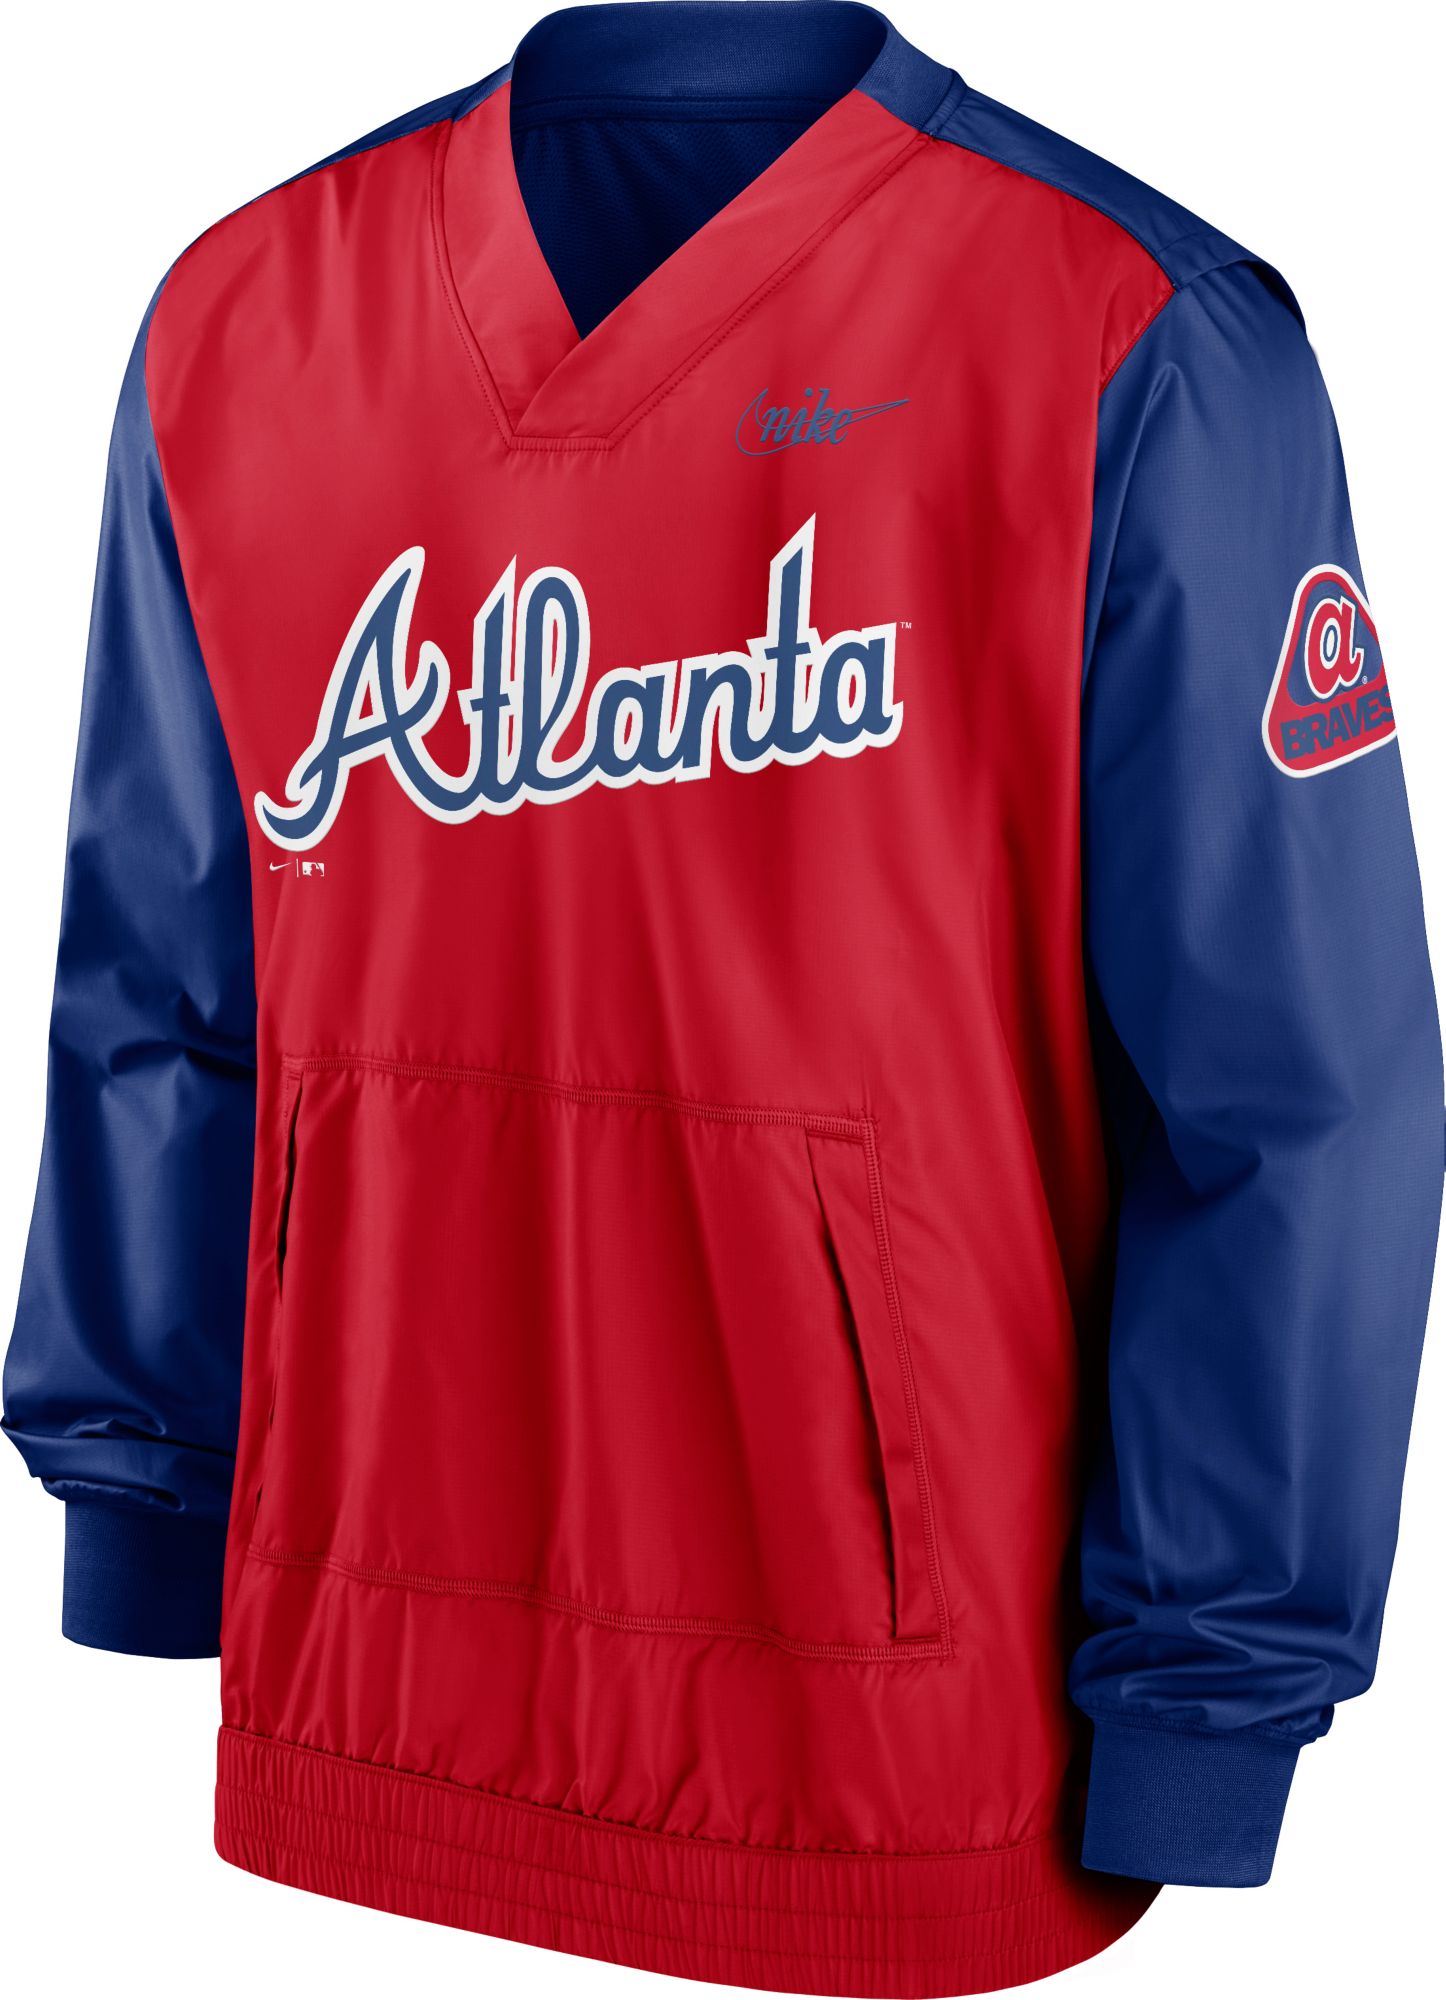 Nike Men's Atlanta Braves Navy Authentic Collection Long-Sleeve